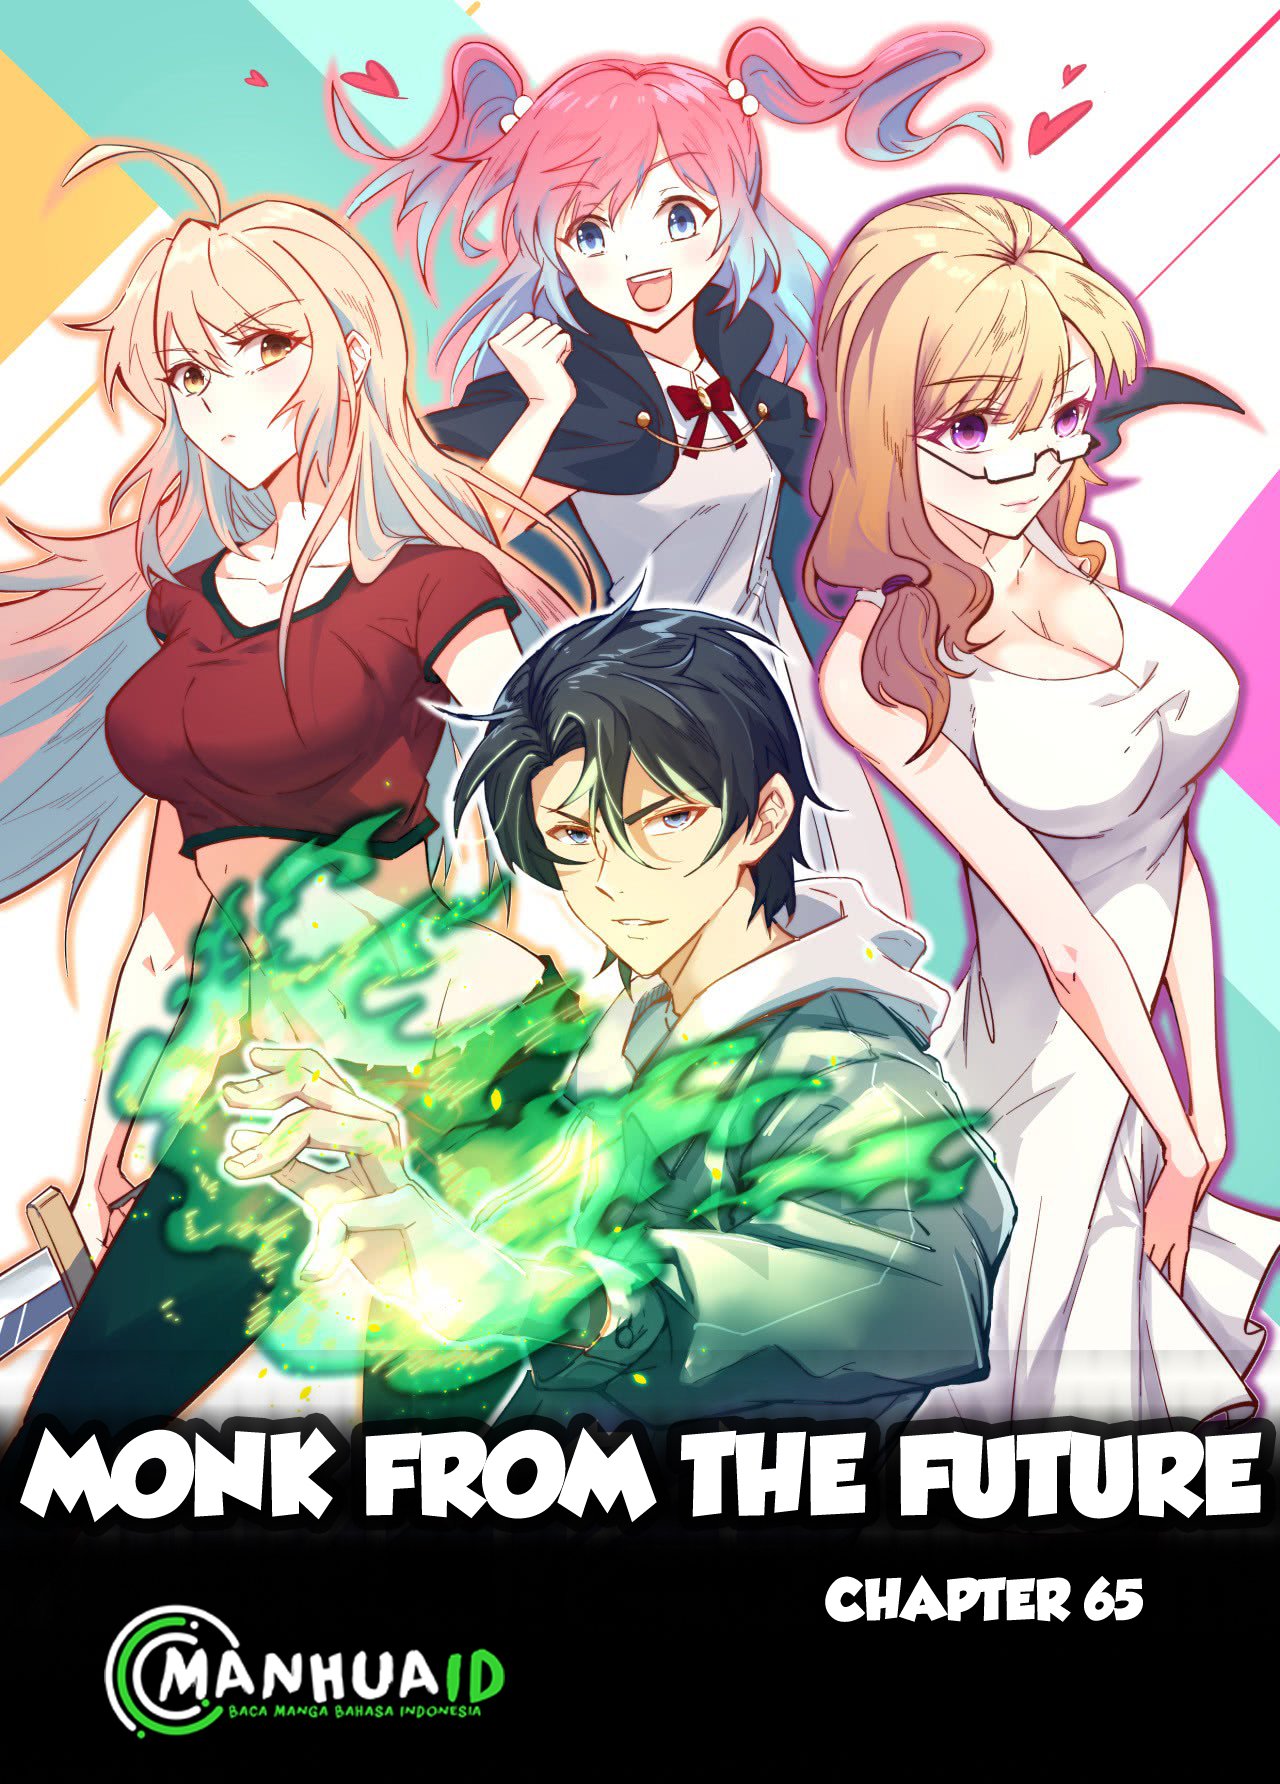 Monk From the Future Chapter 65